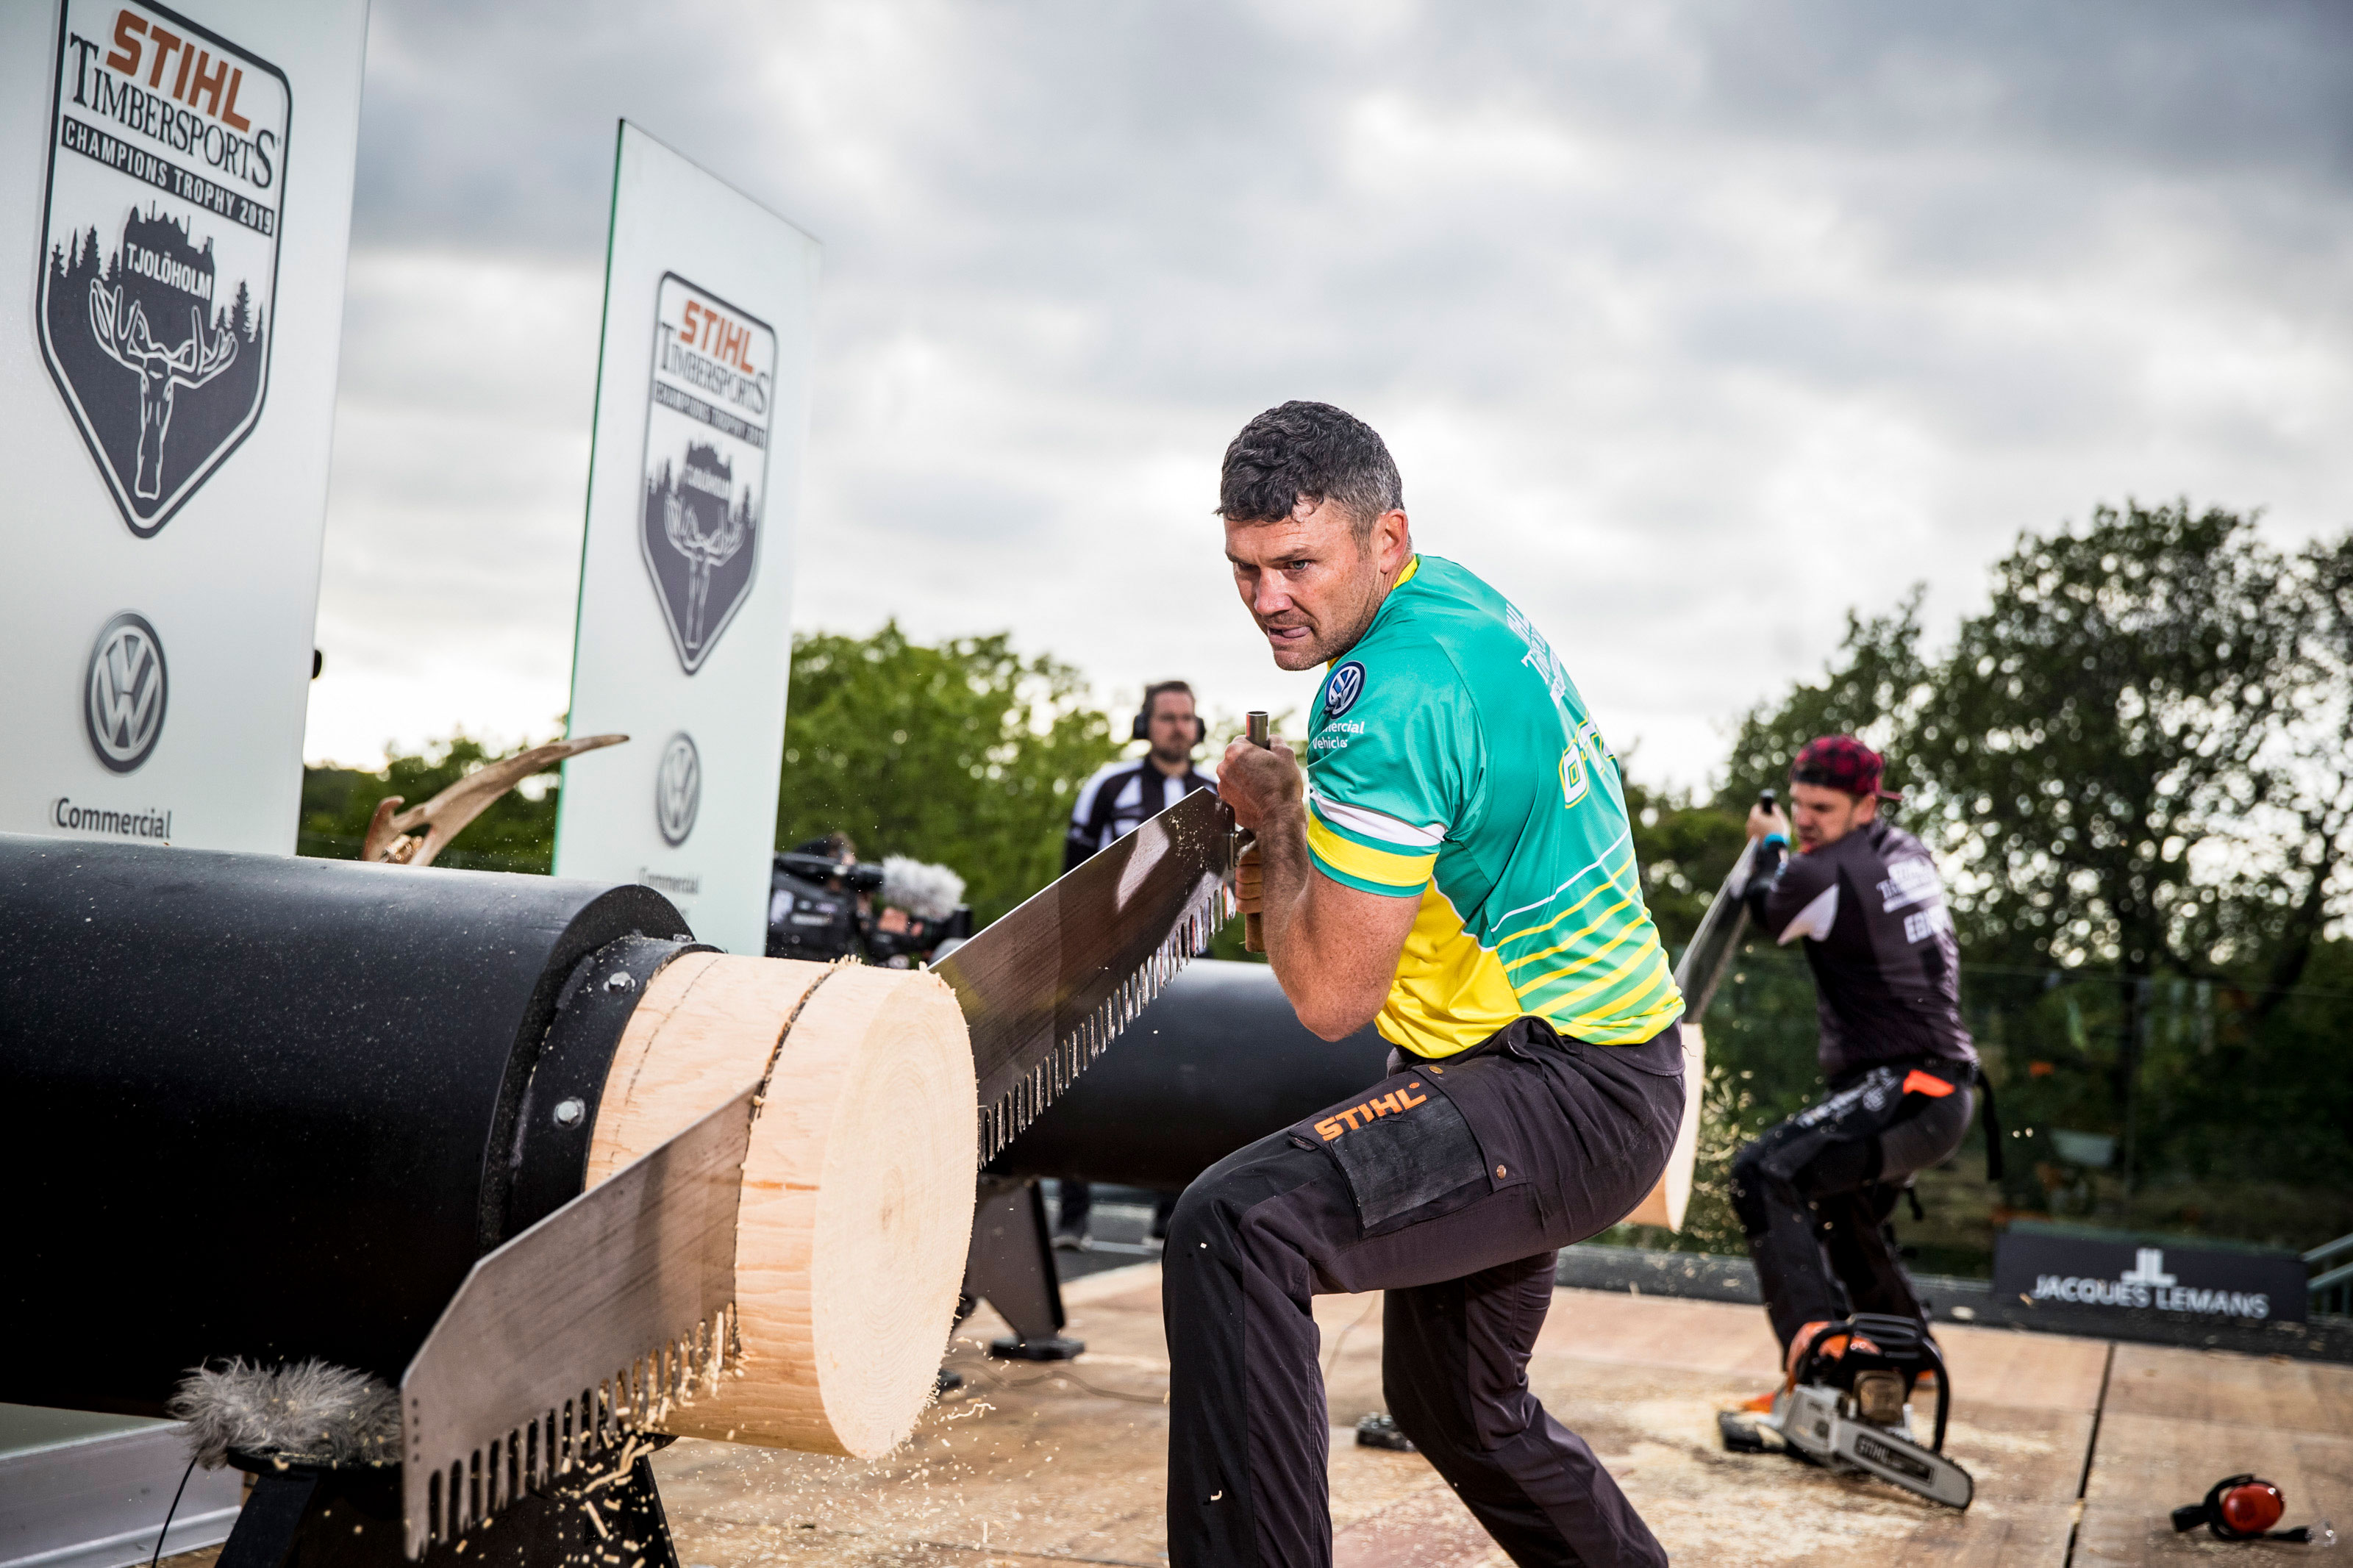 STIHL TIMBERSPORTS® athletes at the Champions Trophy 2019 in Kungsbacka, Sweden